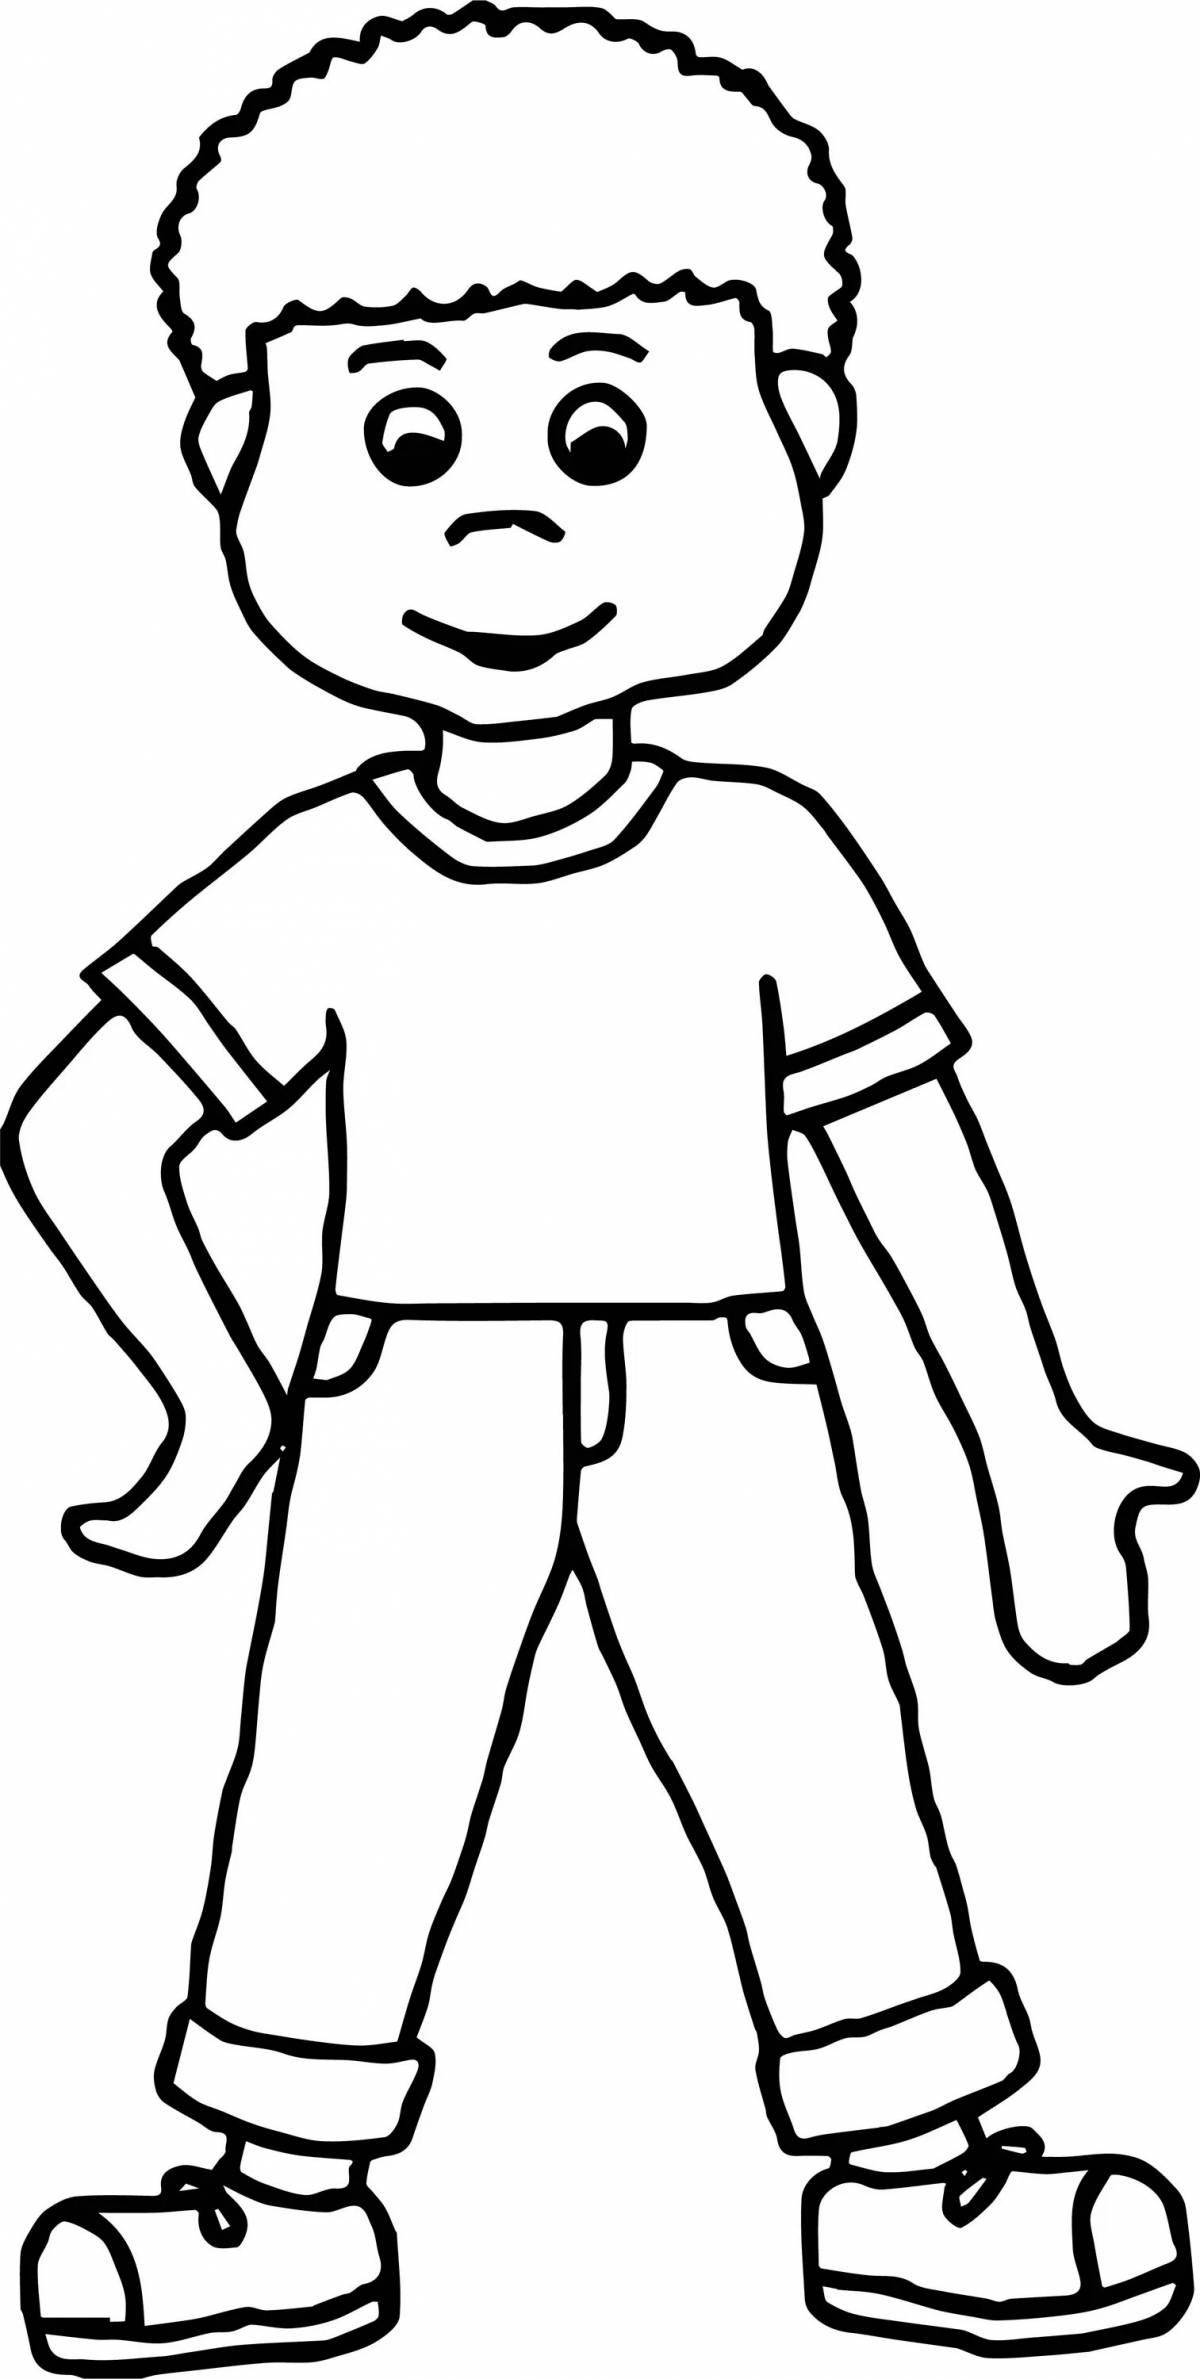 Serene coloring page full length baby